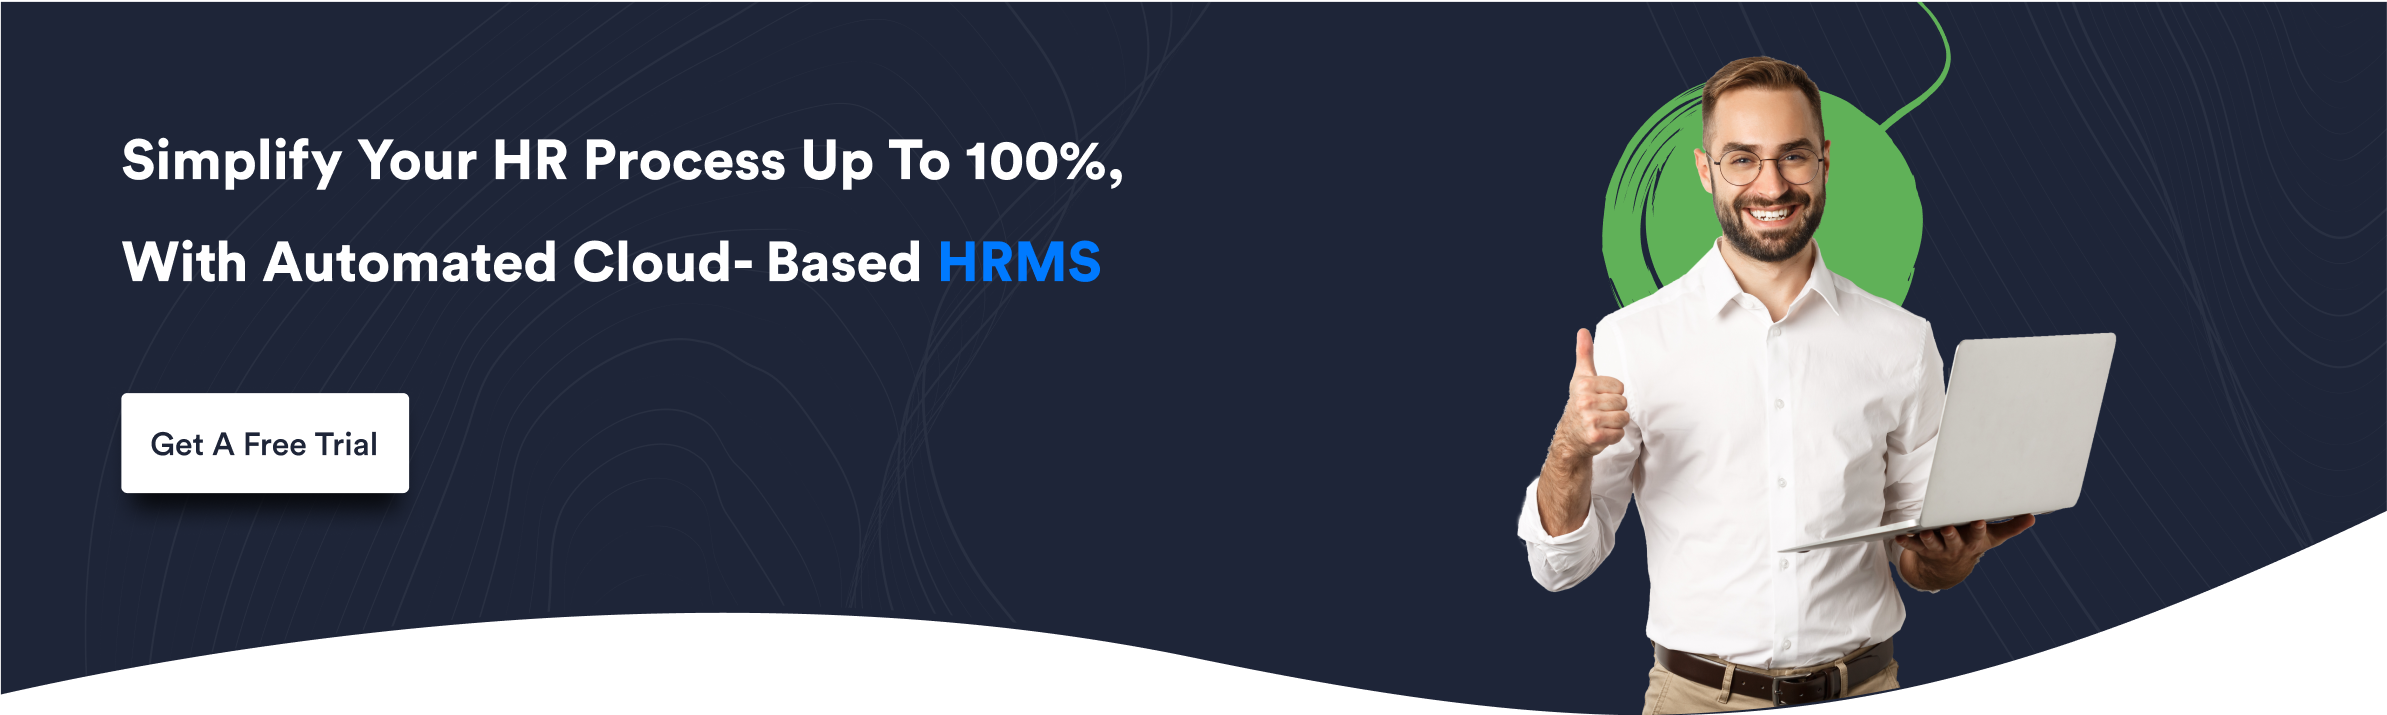 Simplify Your HR Process Up To 100